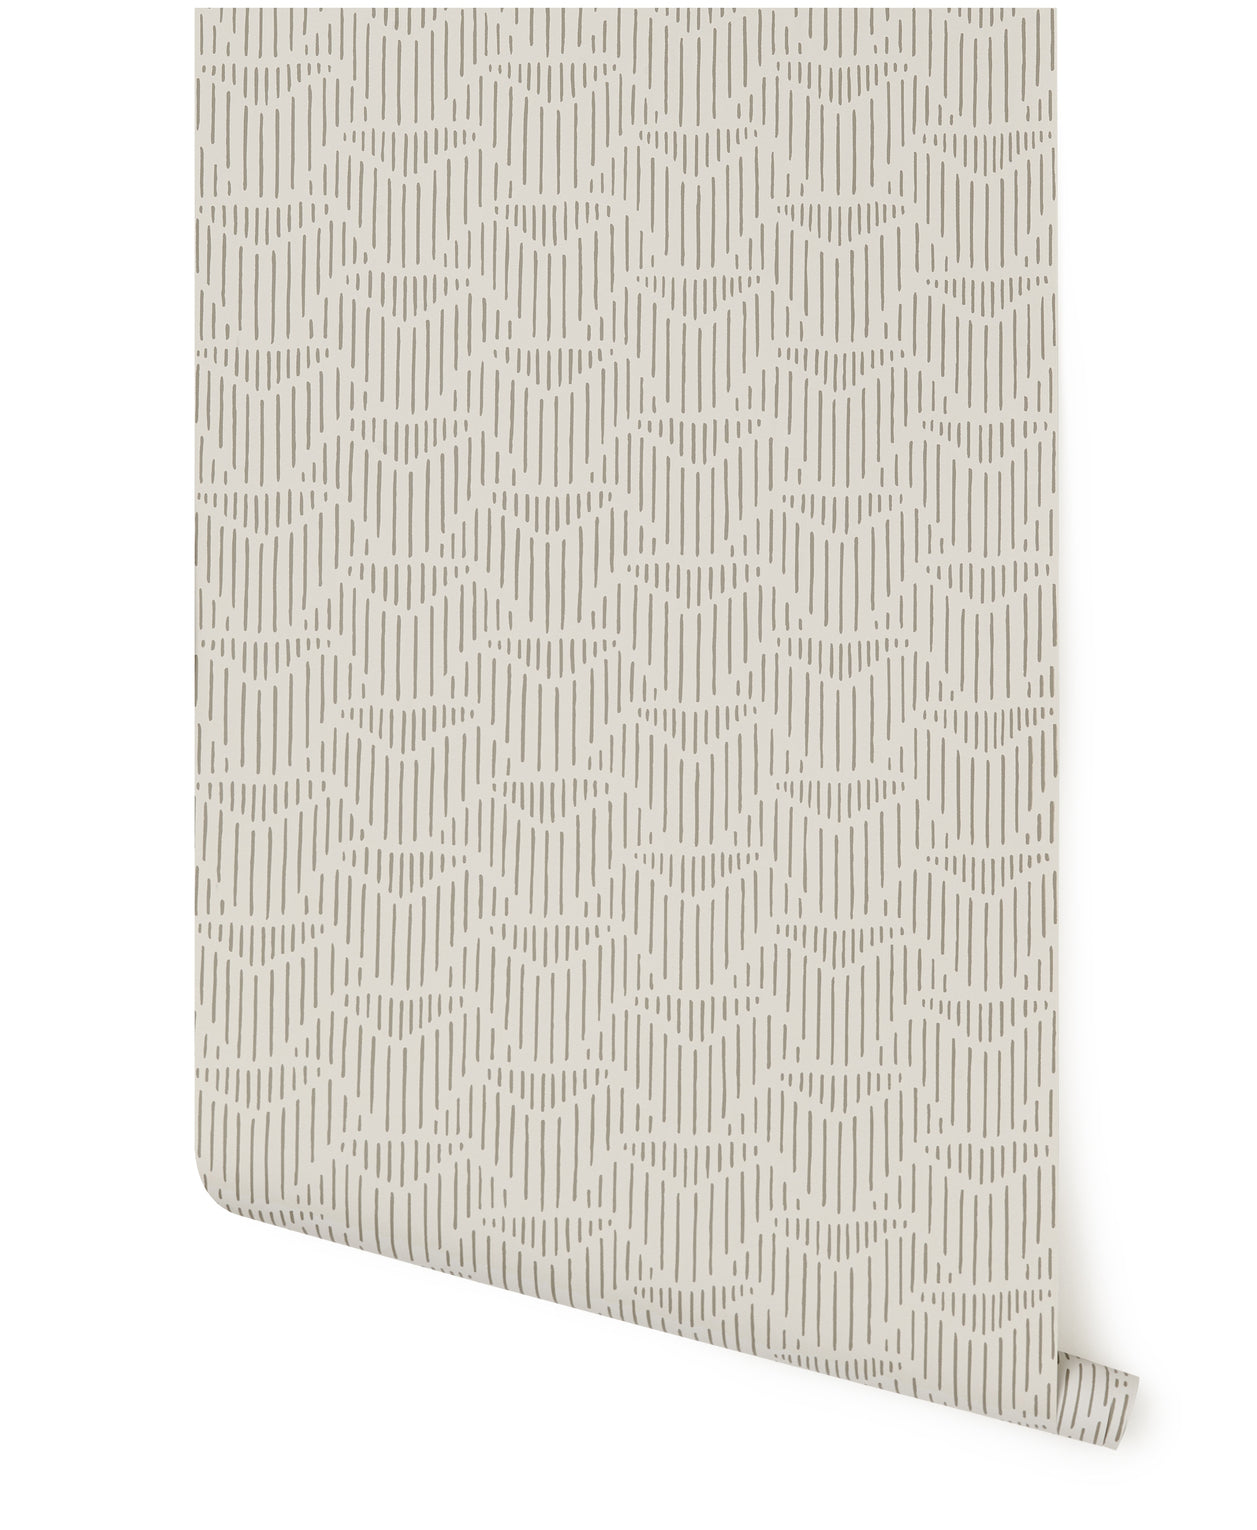 Palma (Sand) wallpaper by Lawson-Fenning for Hygge & West